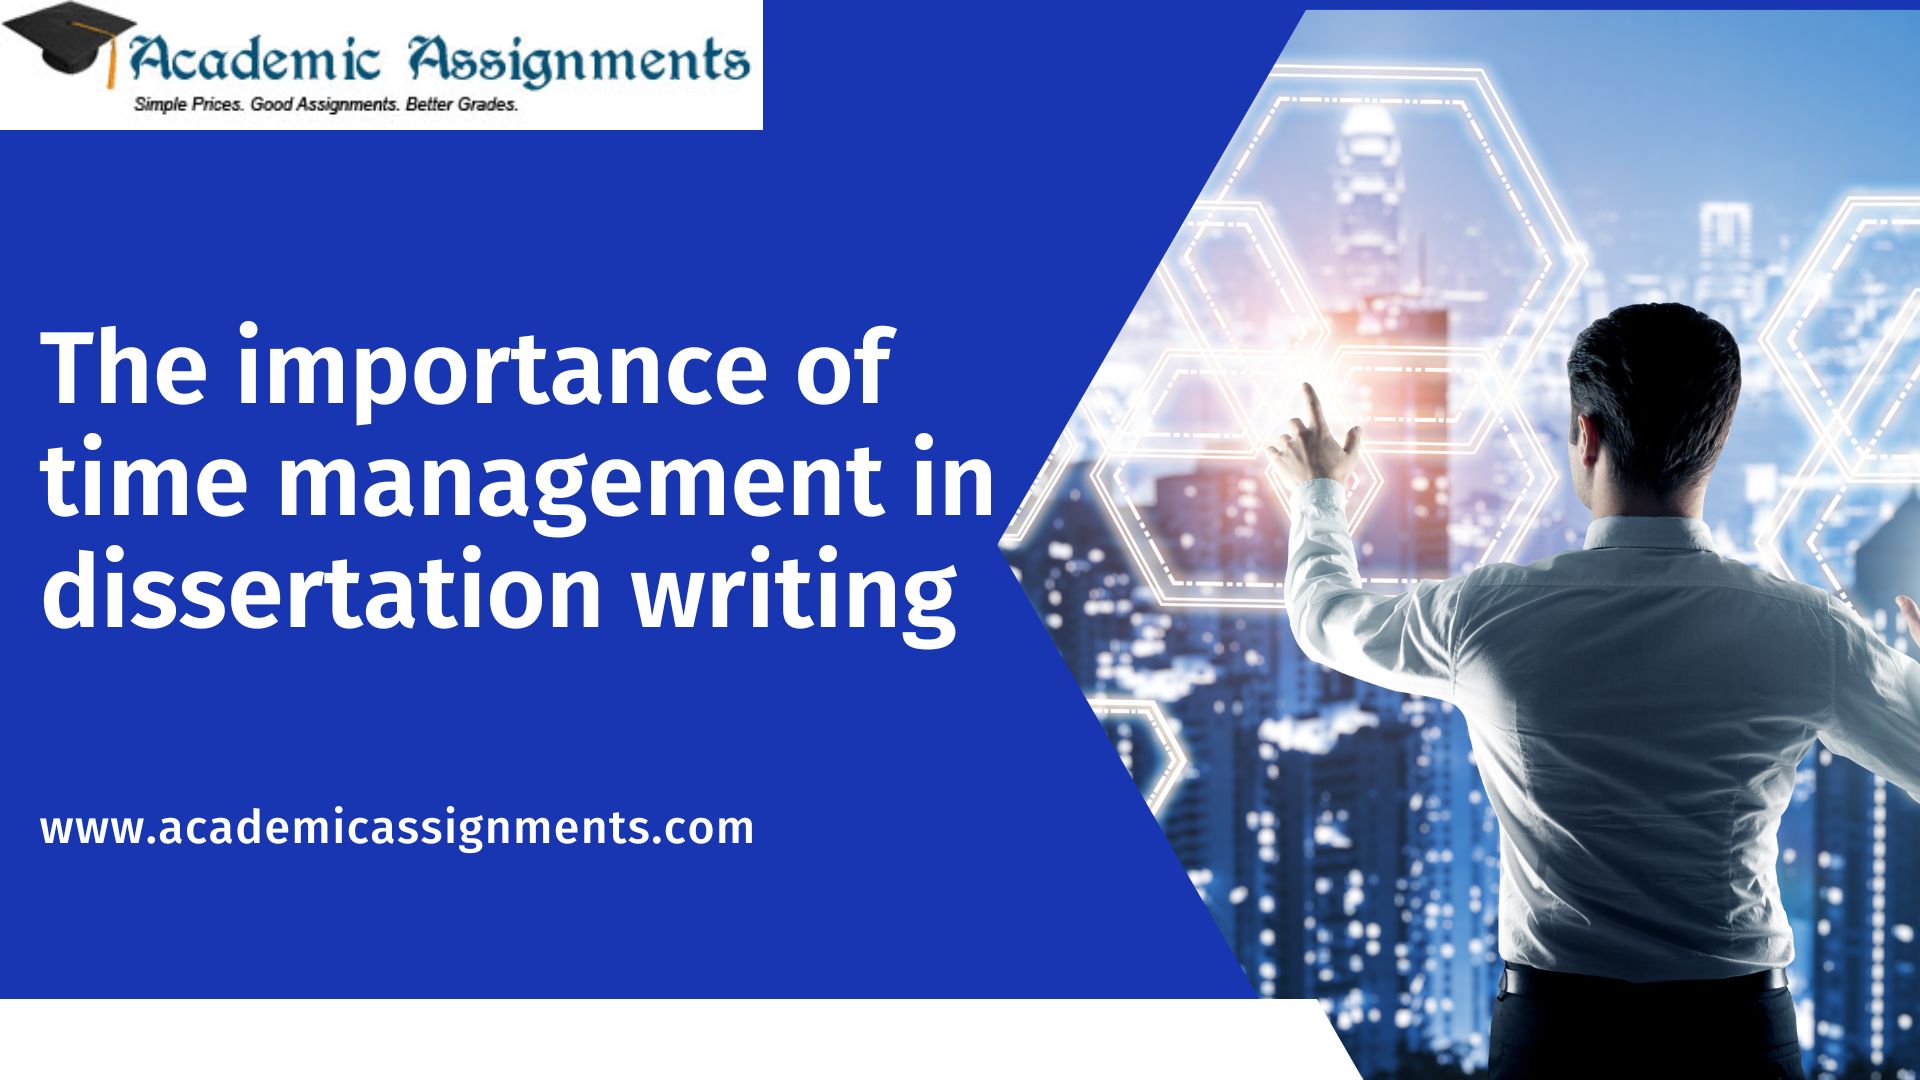 The importance of time management in dissertation writing